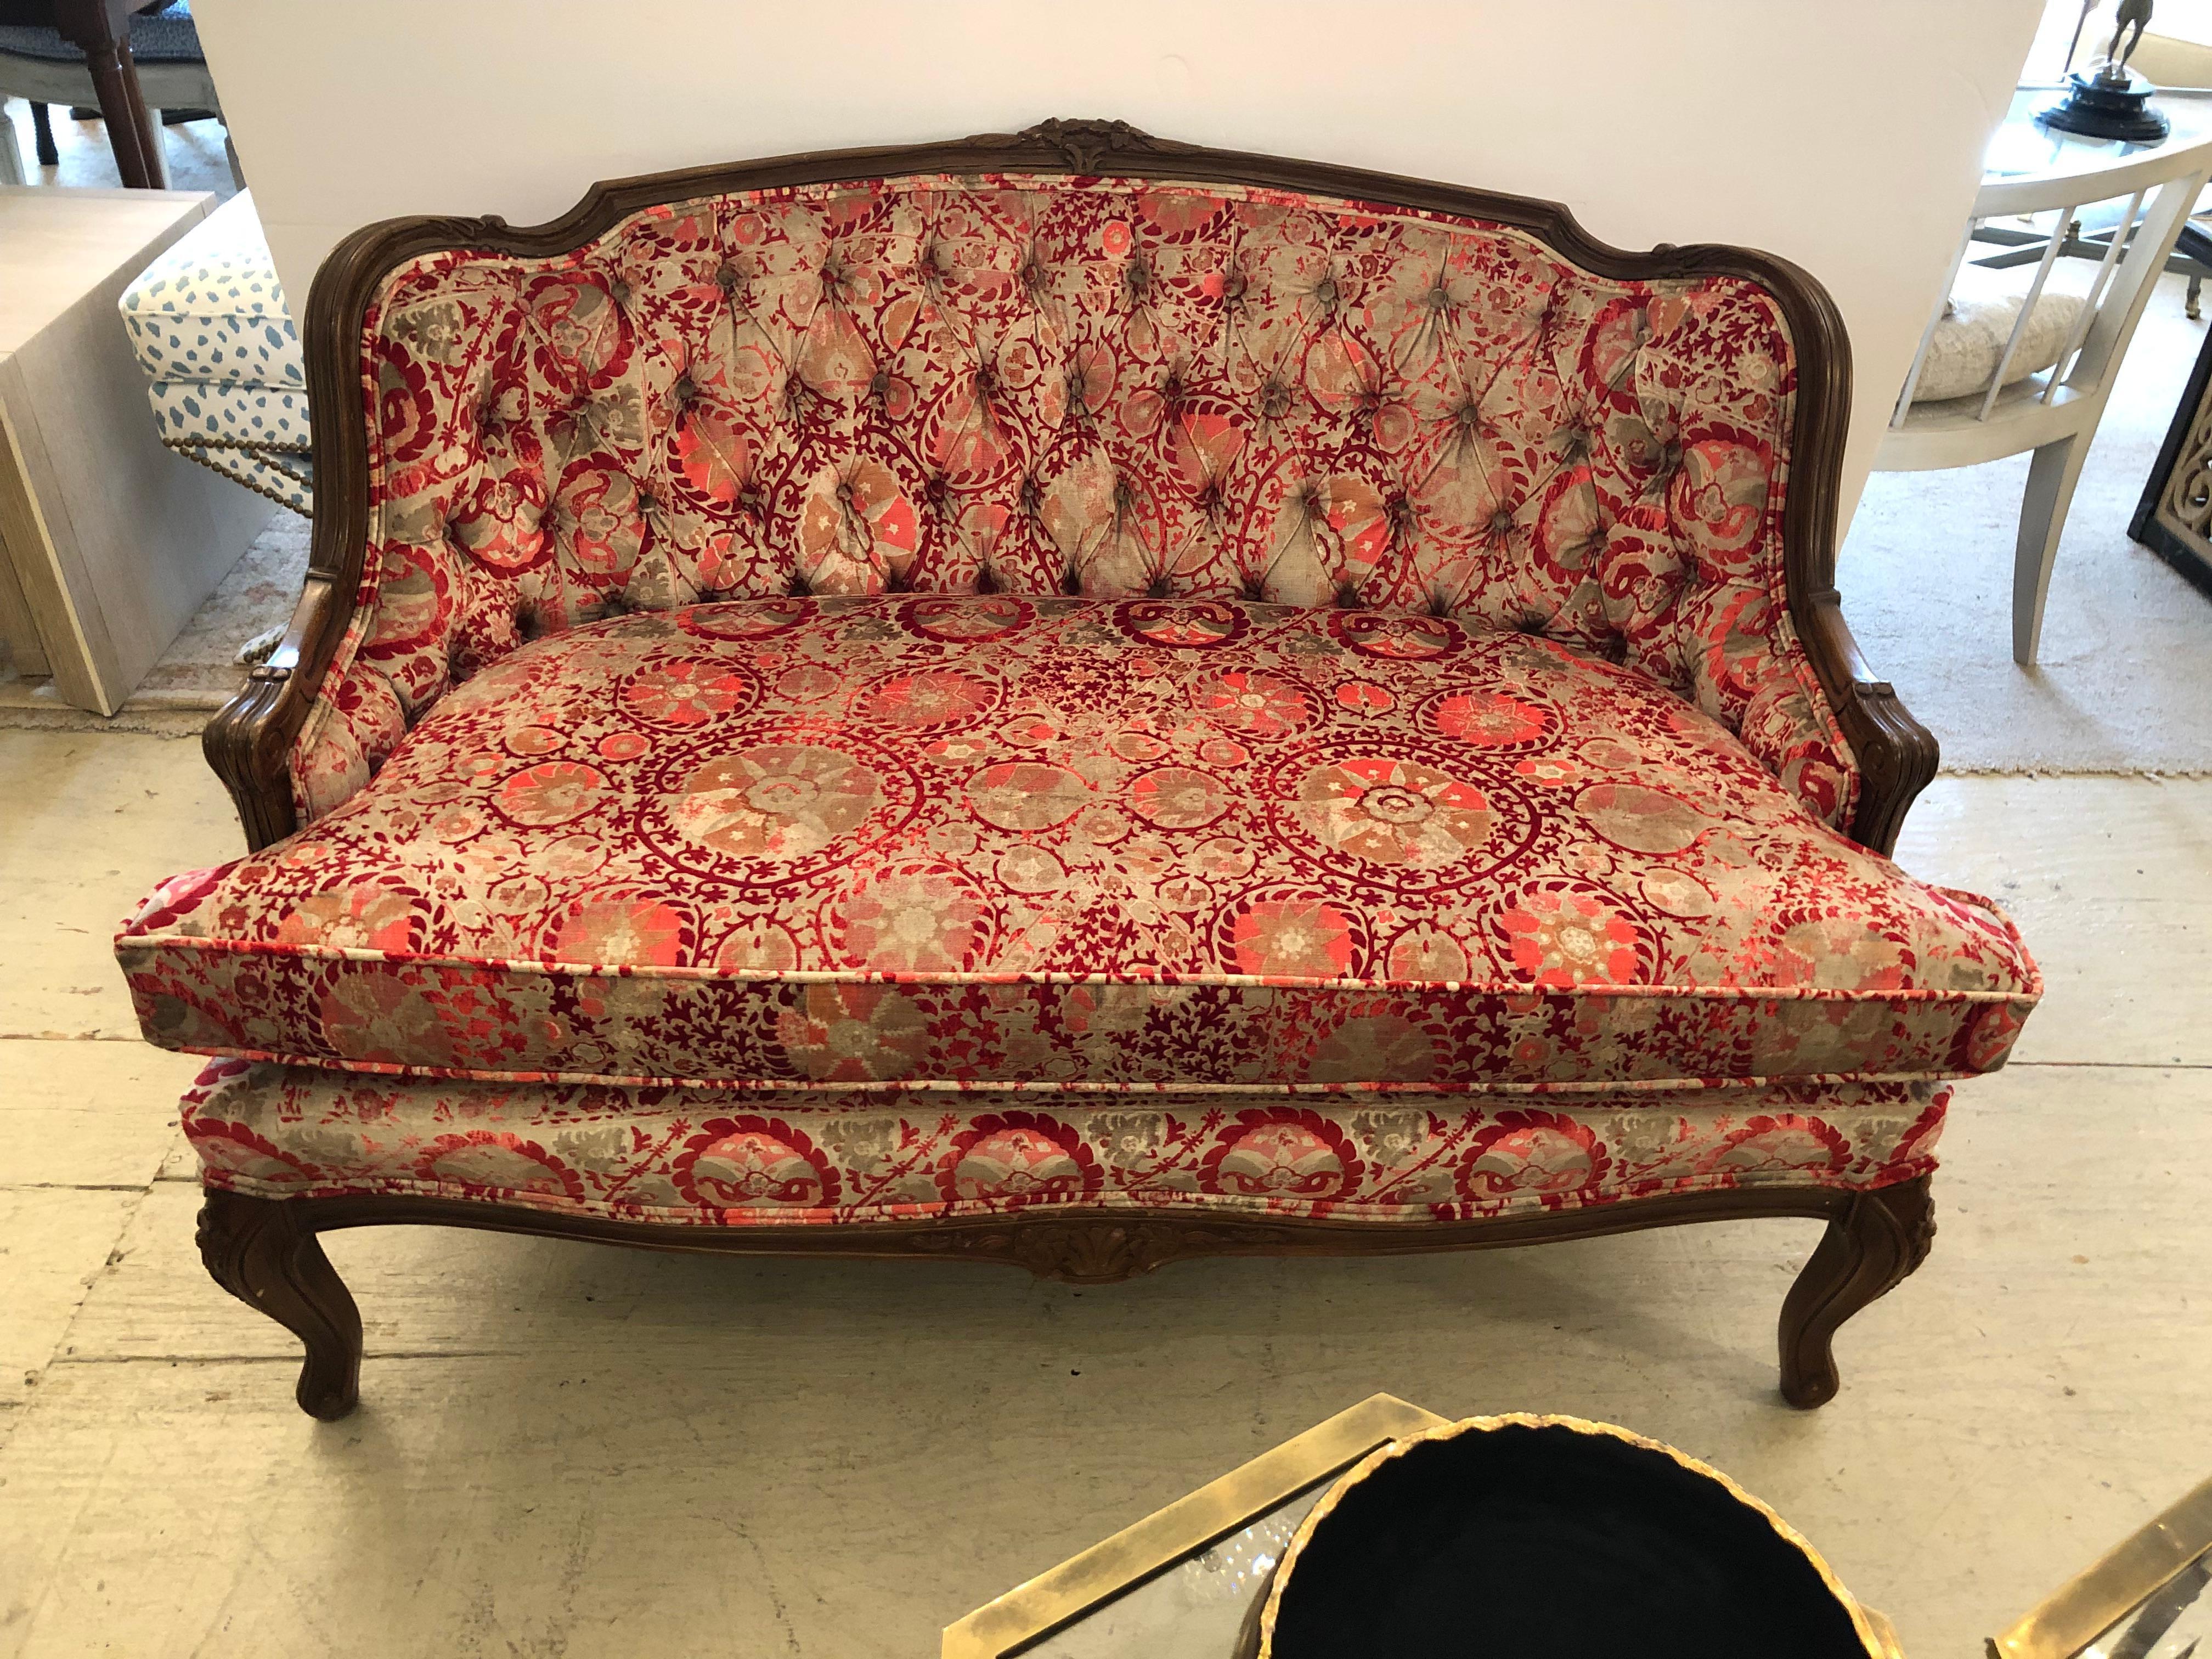 Charming diiminutive sumptuous French loveseat having richly patterned velvet upholstery in shades of rasberry and taupe. Frame is lovely carved walnut with short cabriole legs. The elegant tufted back has double welting, and from the back it curves